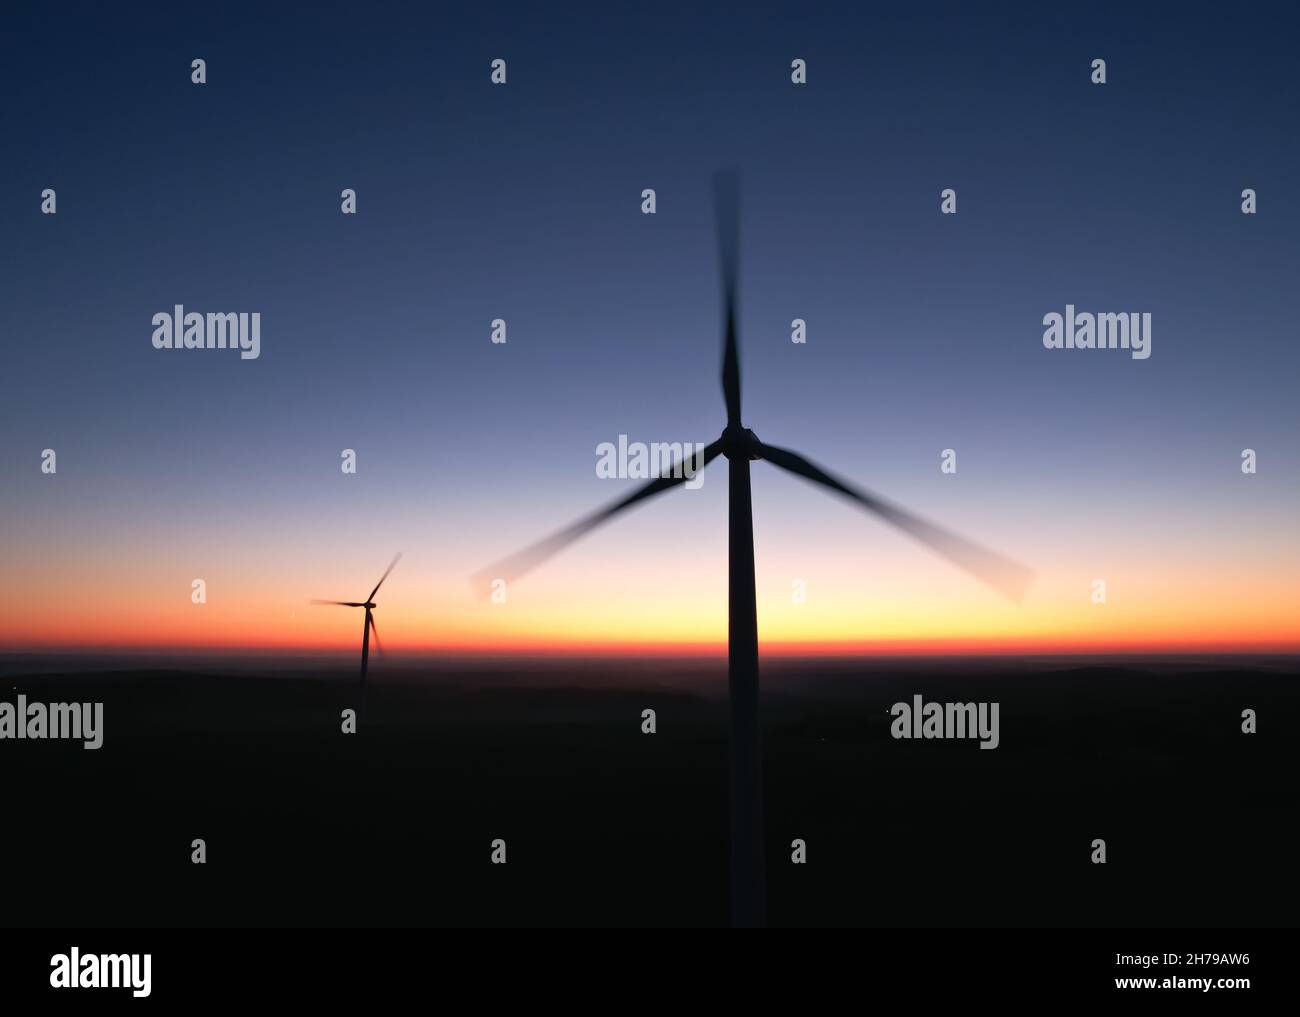 Two rotating propellers of wind turbines on the background of the night sky. Stock Photo